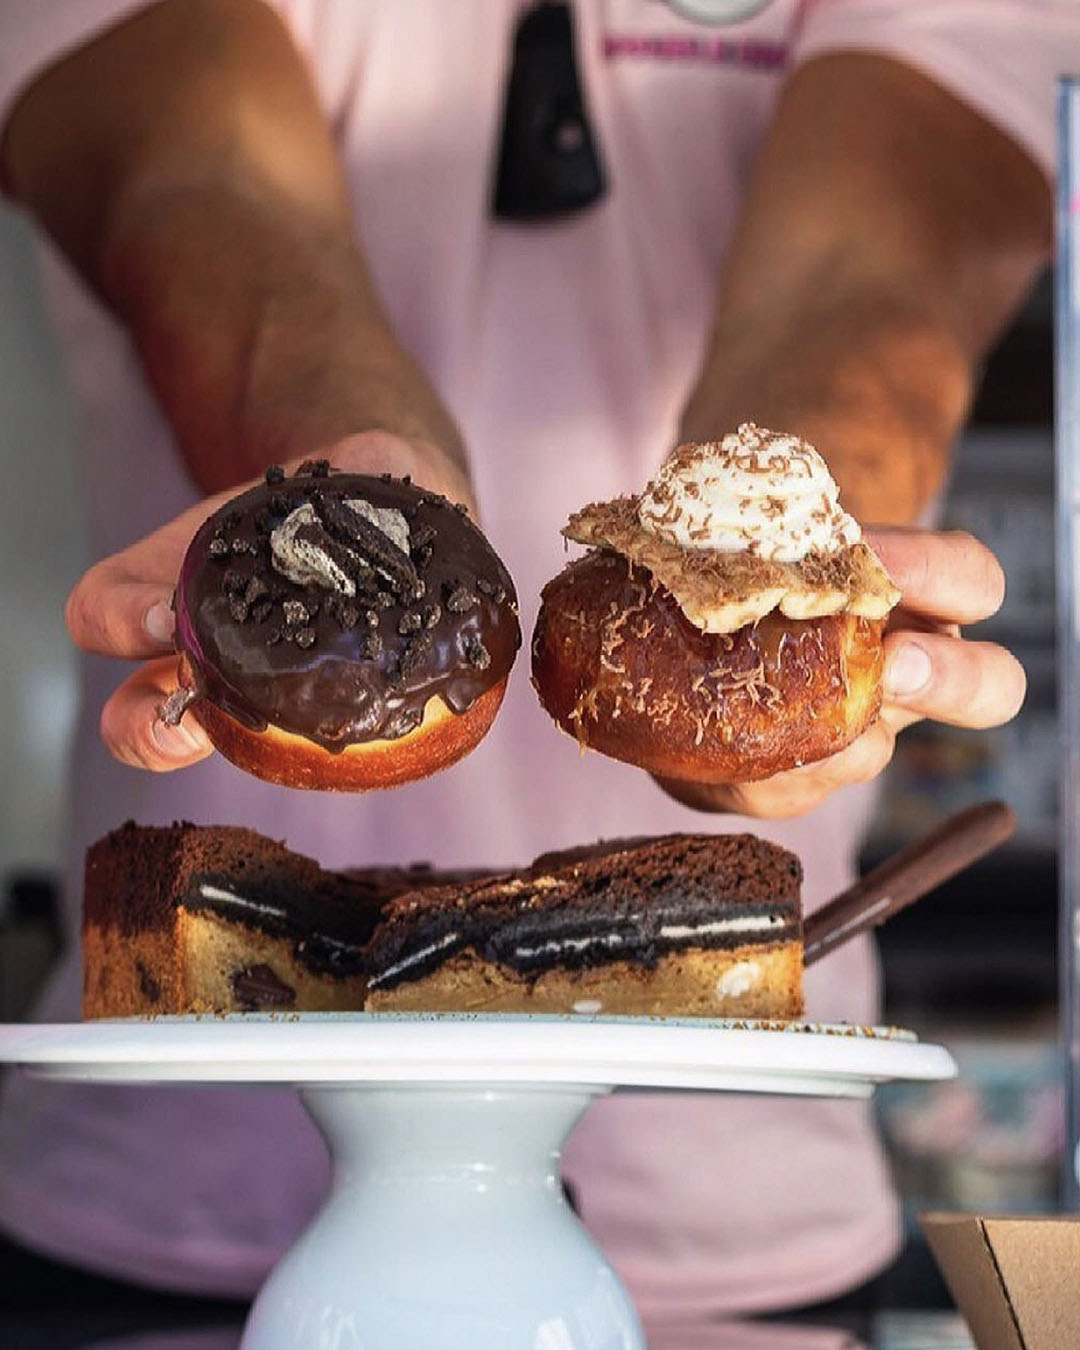 Someone holds up amazing-looking doughnuts with a cake in the foreground.